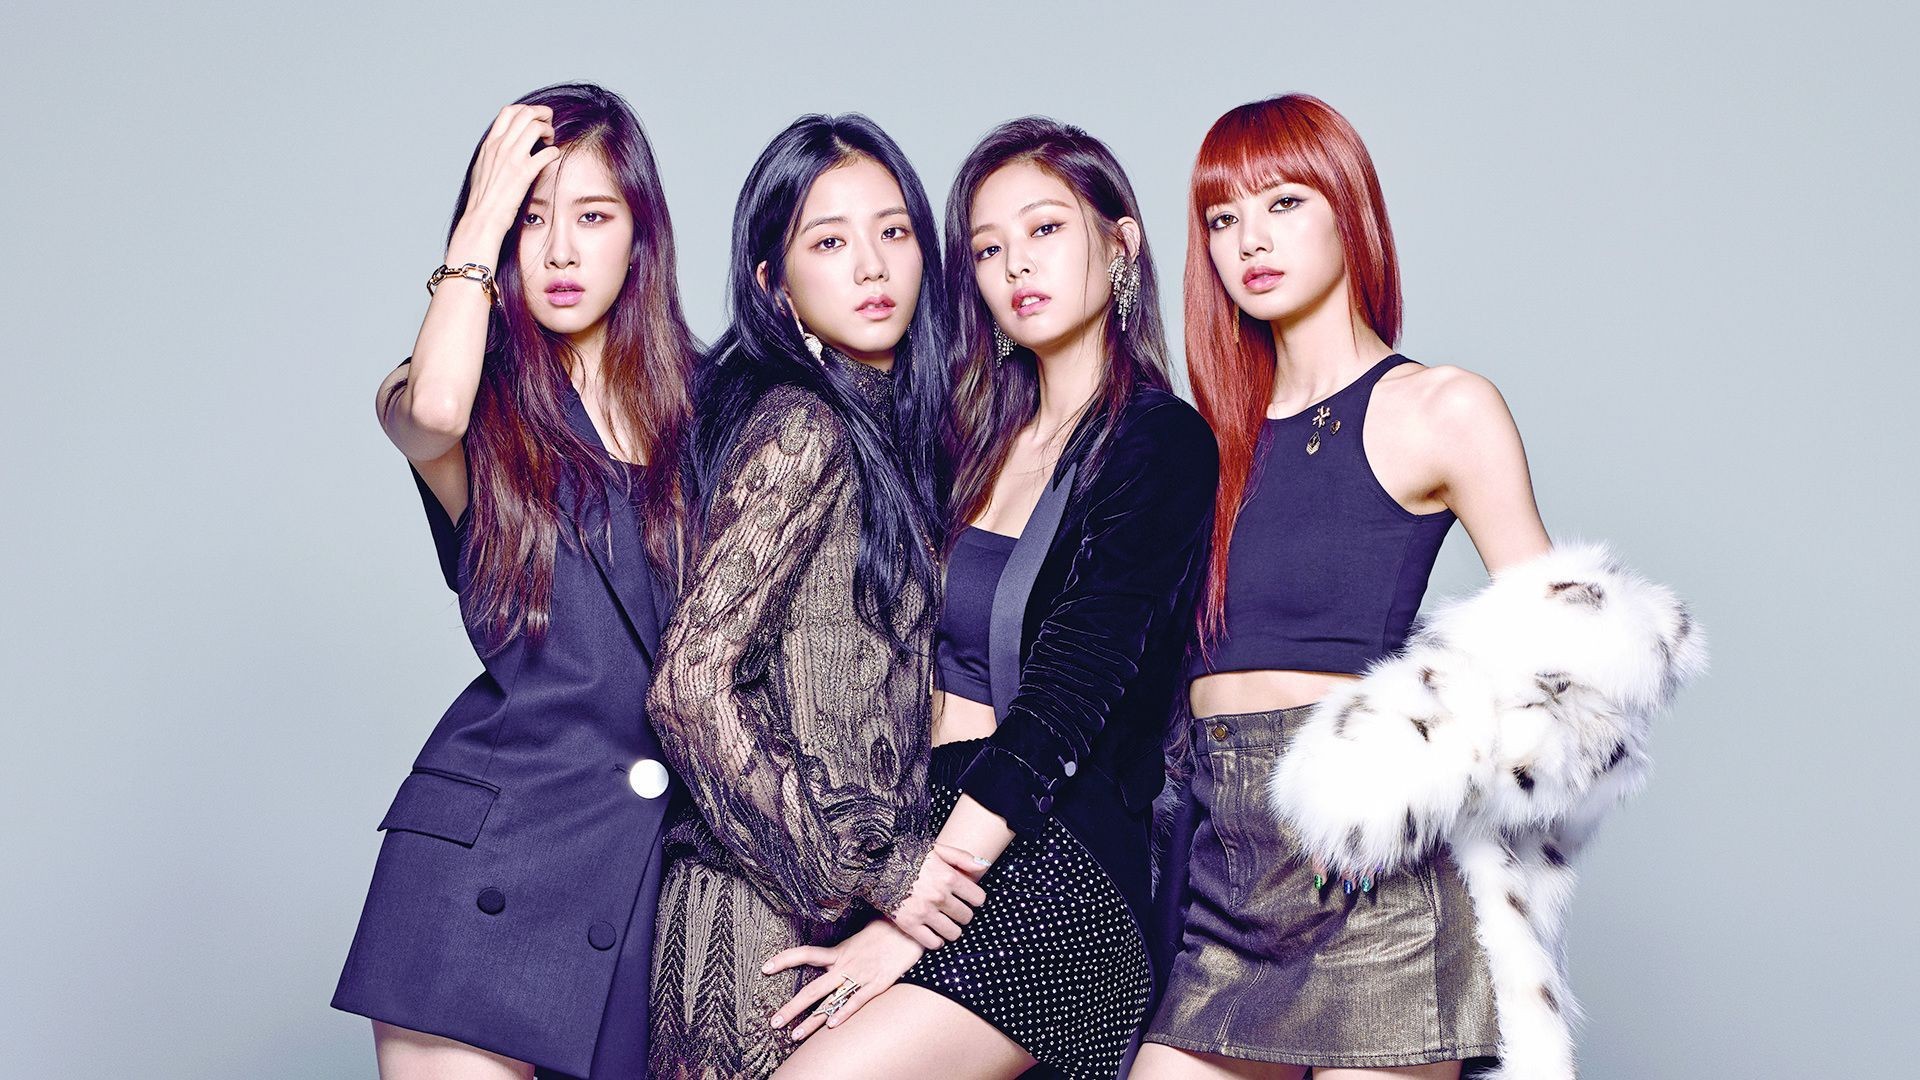 Computer Wallpapers Blackpink with high-resolution 1920x1080 pixel. You can use this wallpaper for your Windows and Mac OS computers as well as your Android and iPhone smartphones